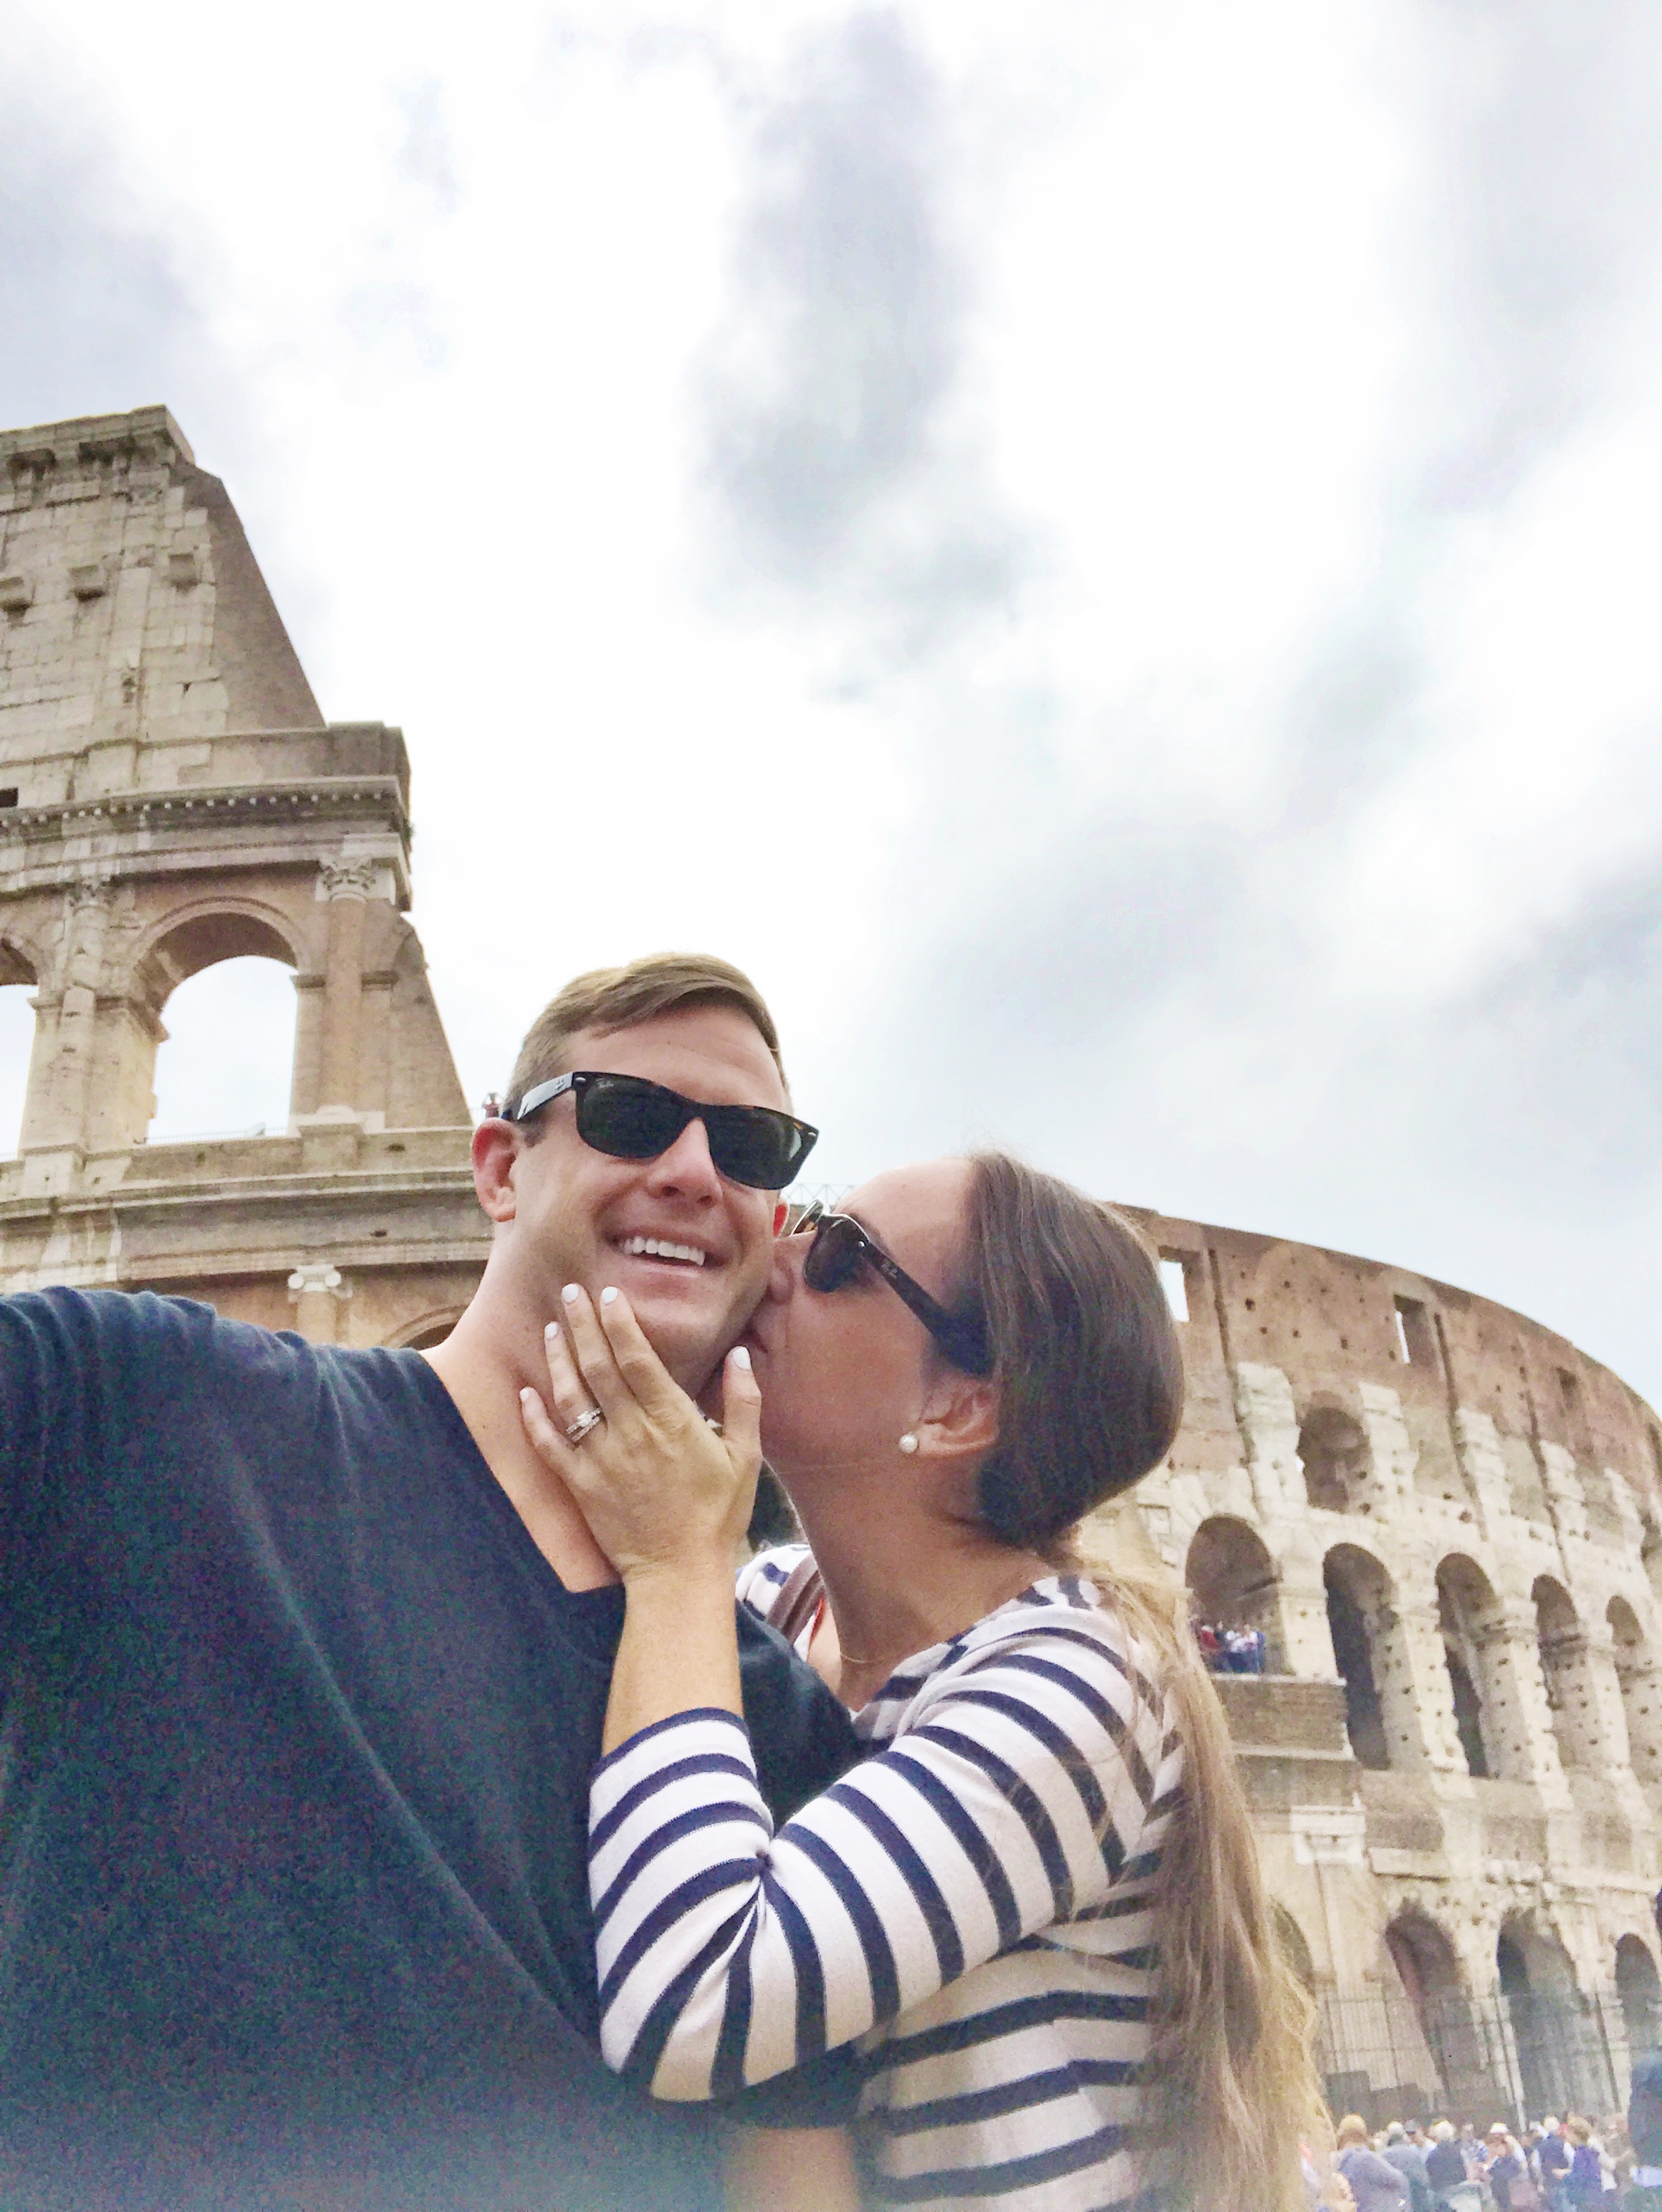 2 Days In Rome - What to do in Rome - Rome Italy - Rome Itinerary - Italy Itinerary - Rome Hotels - Travel to Rome - What to wear in Rome - Rome Hotels - Rome Tips - Visiting the Vatican - Colosseum - Trevi Fountain - Rome Photography - Travel Blog - Communikait by Kait Hanson